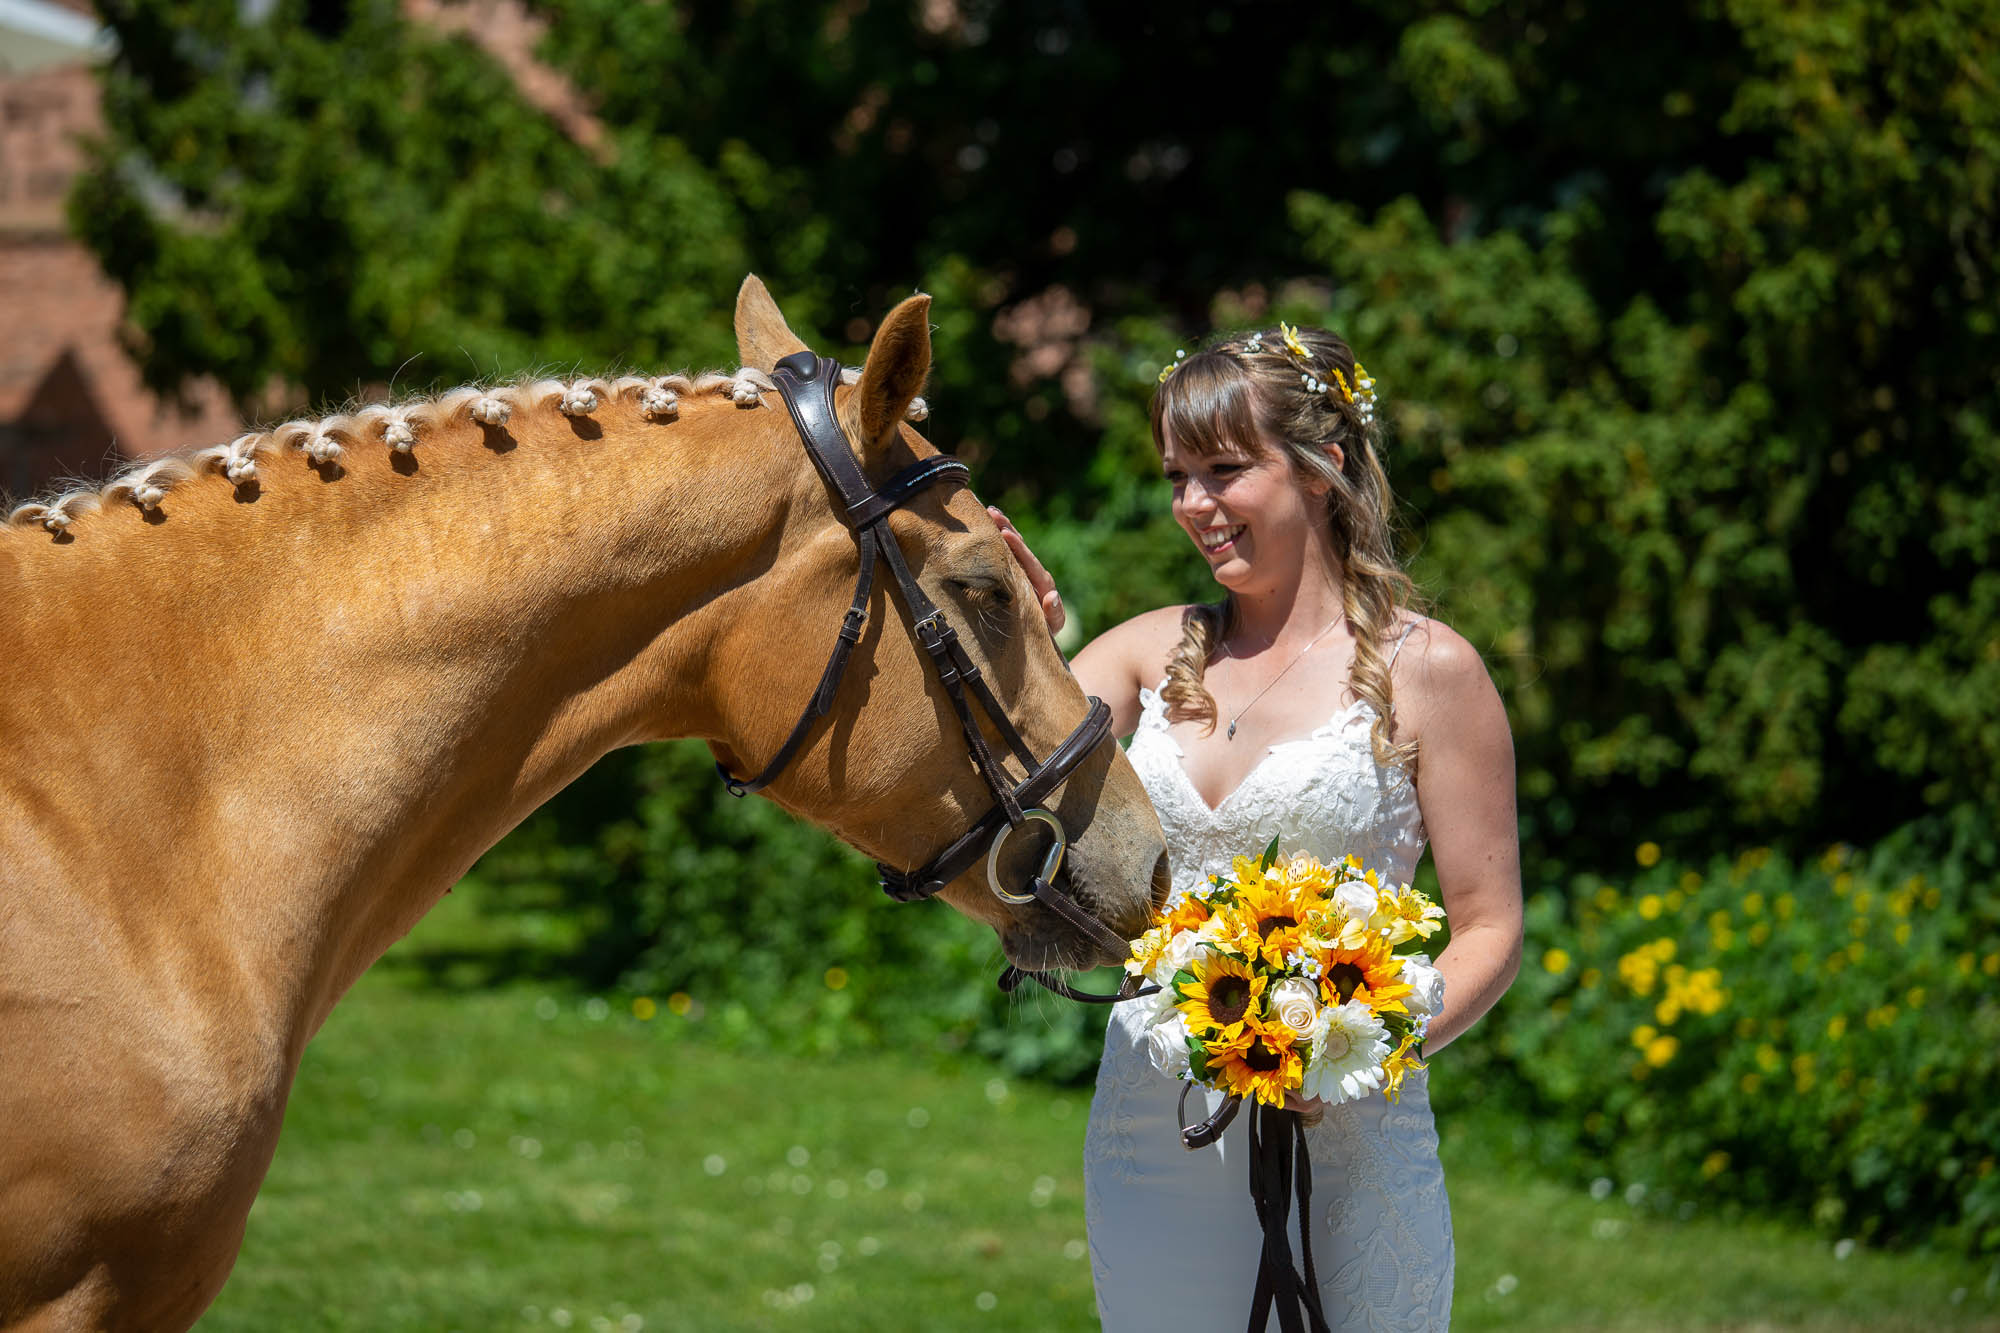 Faux sunflowers set the scene for a vibrant summer wedding at Hestercombe. With Martin Dabek Photography